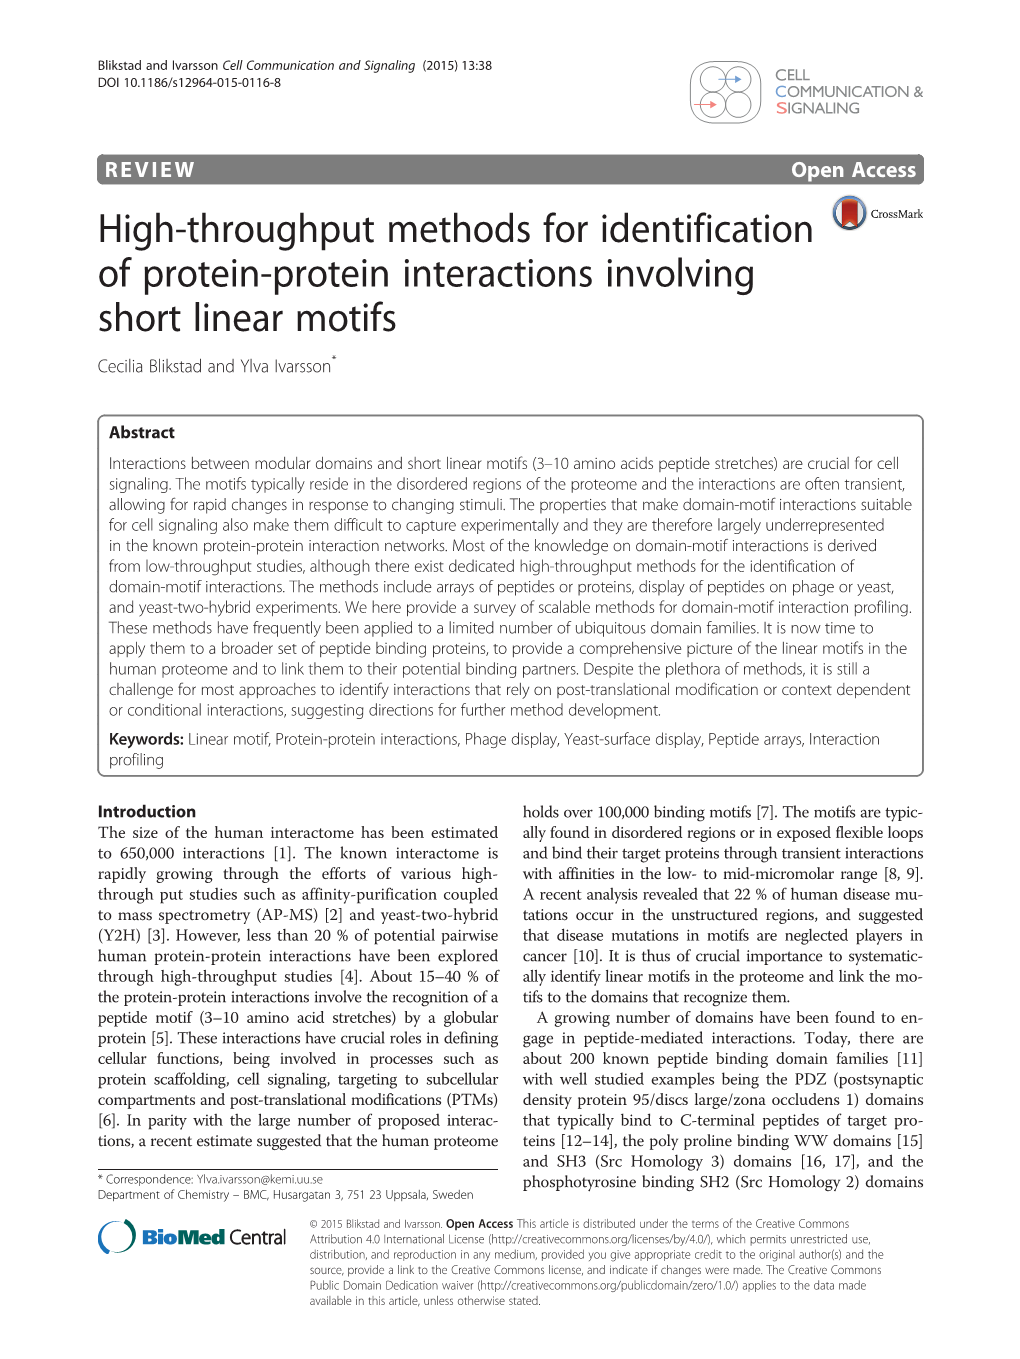 High-Throughput Methods for Identification of Protein-Protein Interactions Involving Short Linear Motifs Cecilia Blikstad and Ylva Ivarsson*